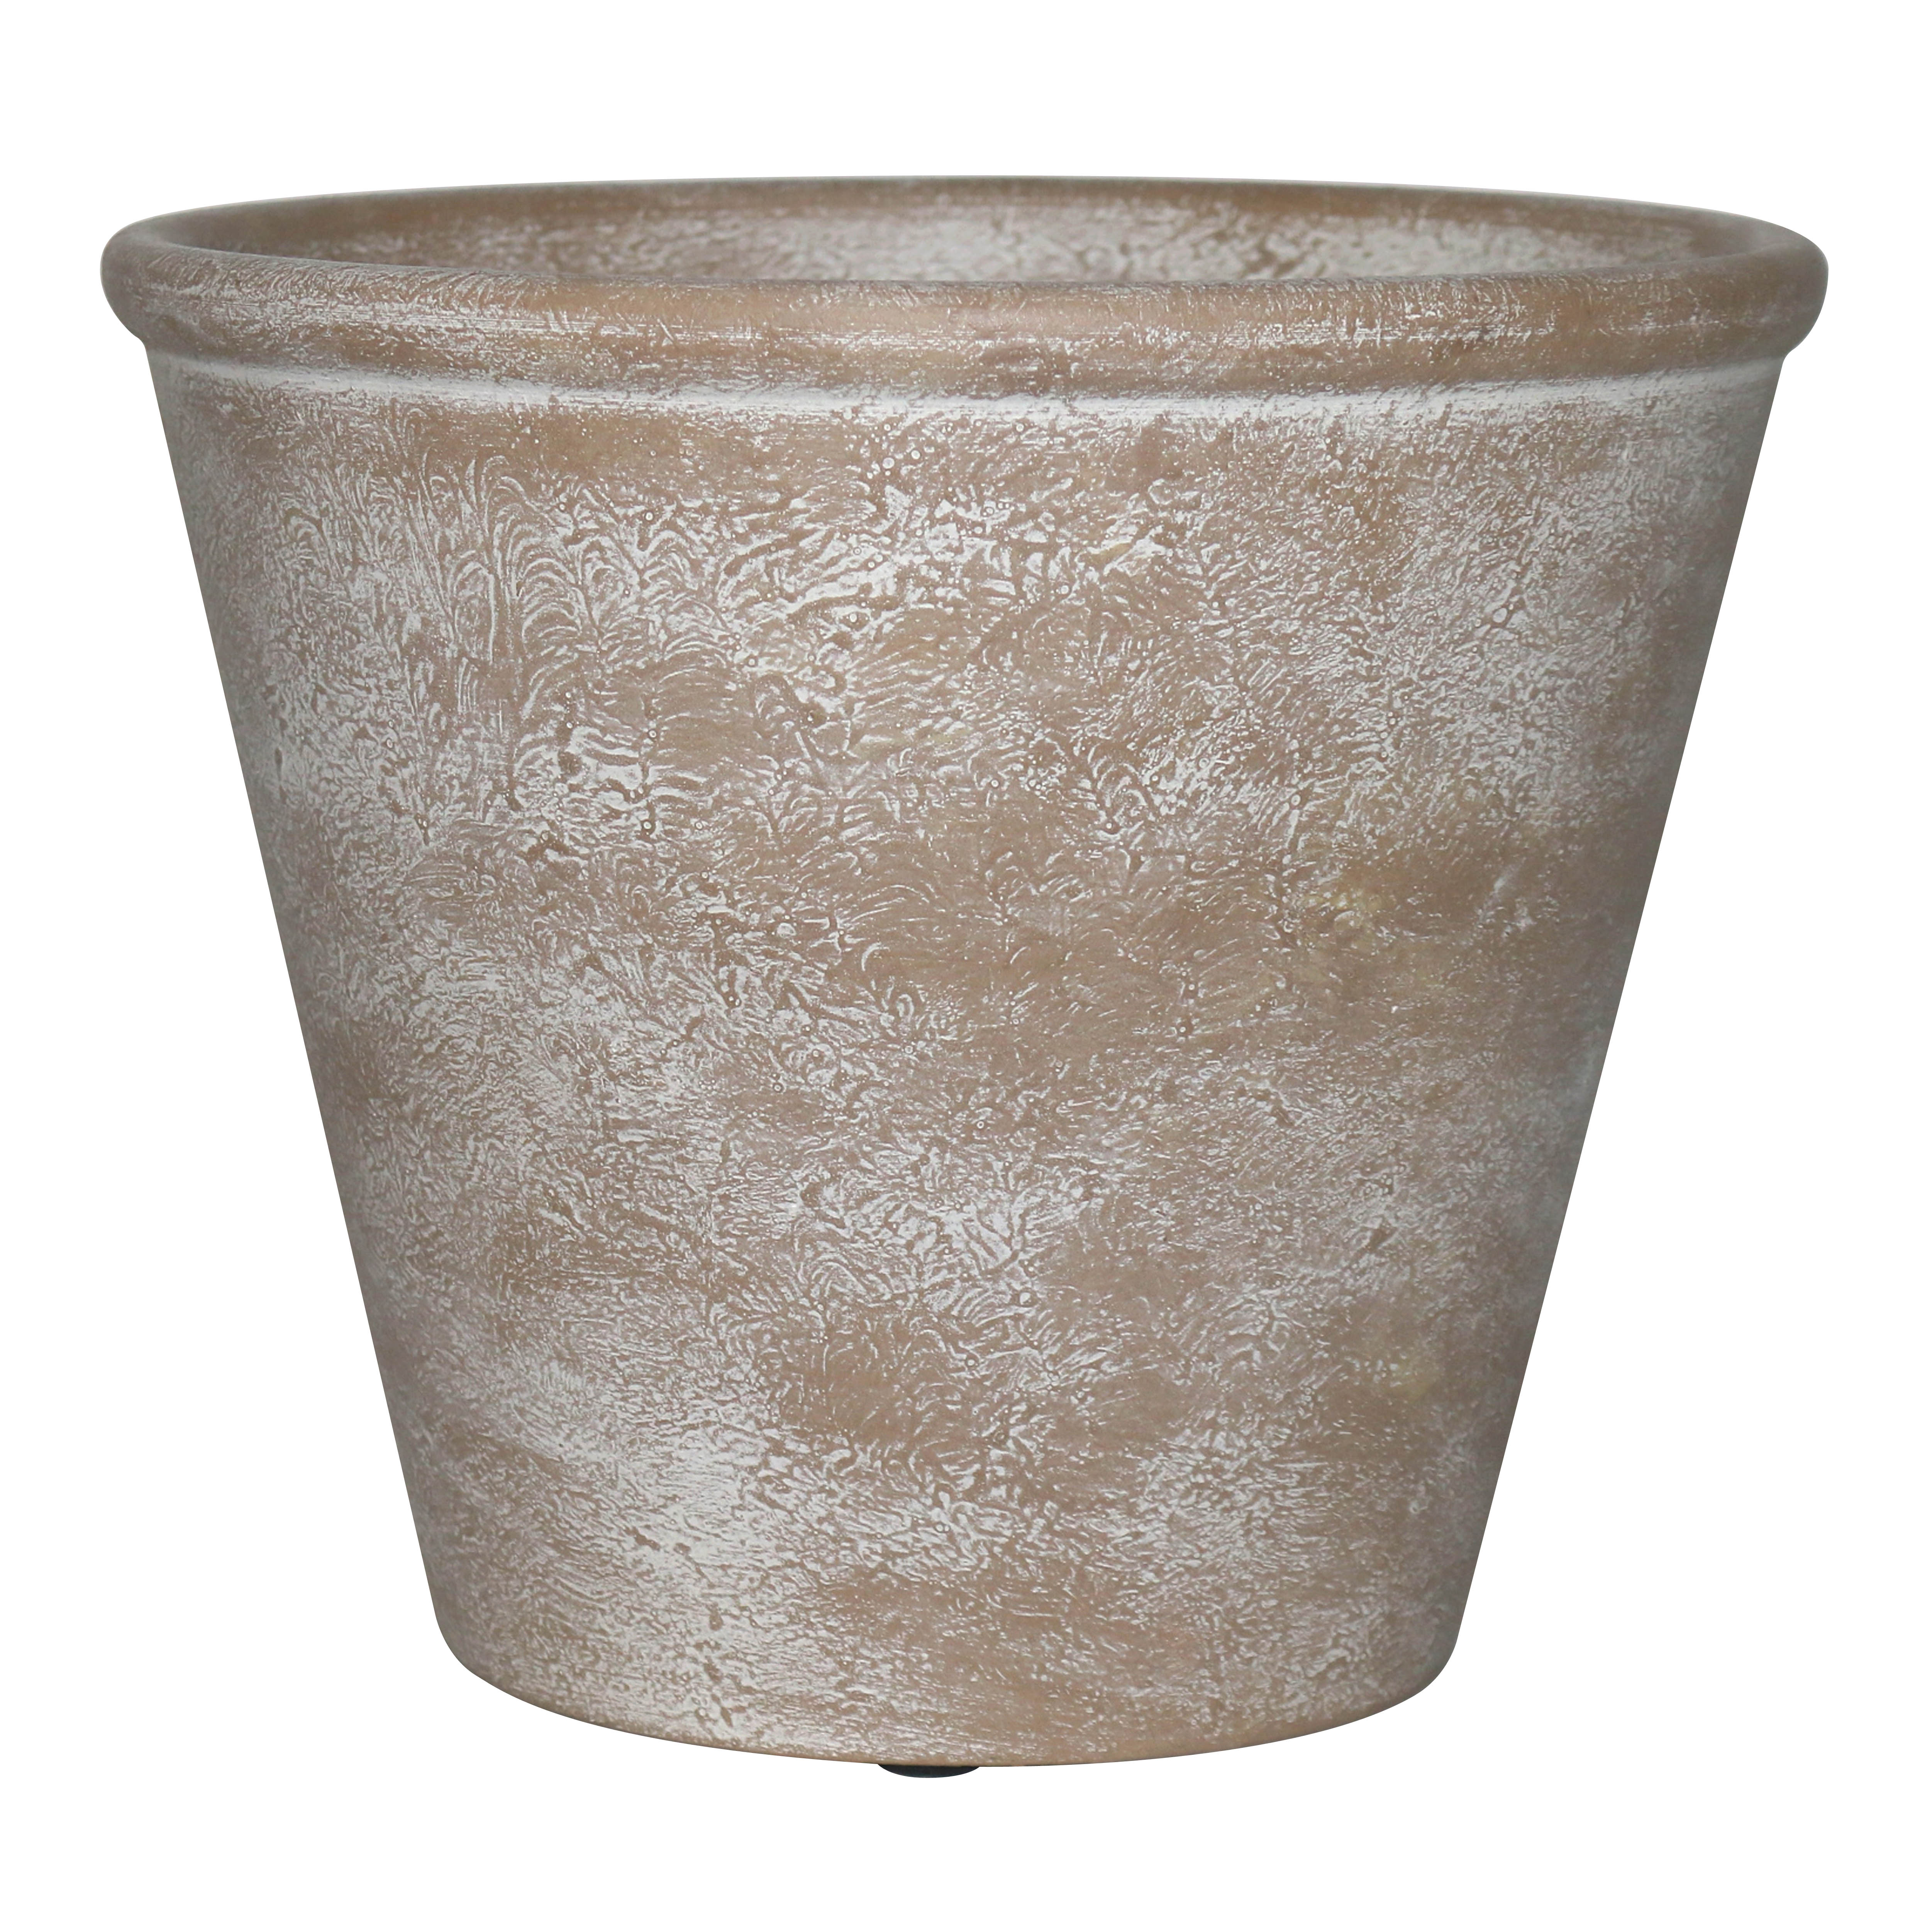 Better Homes&gardens 10 inch Hand-painted Brown Ceramic Pot - image 1 of 9